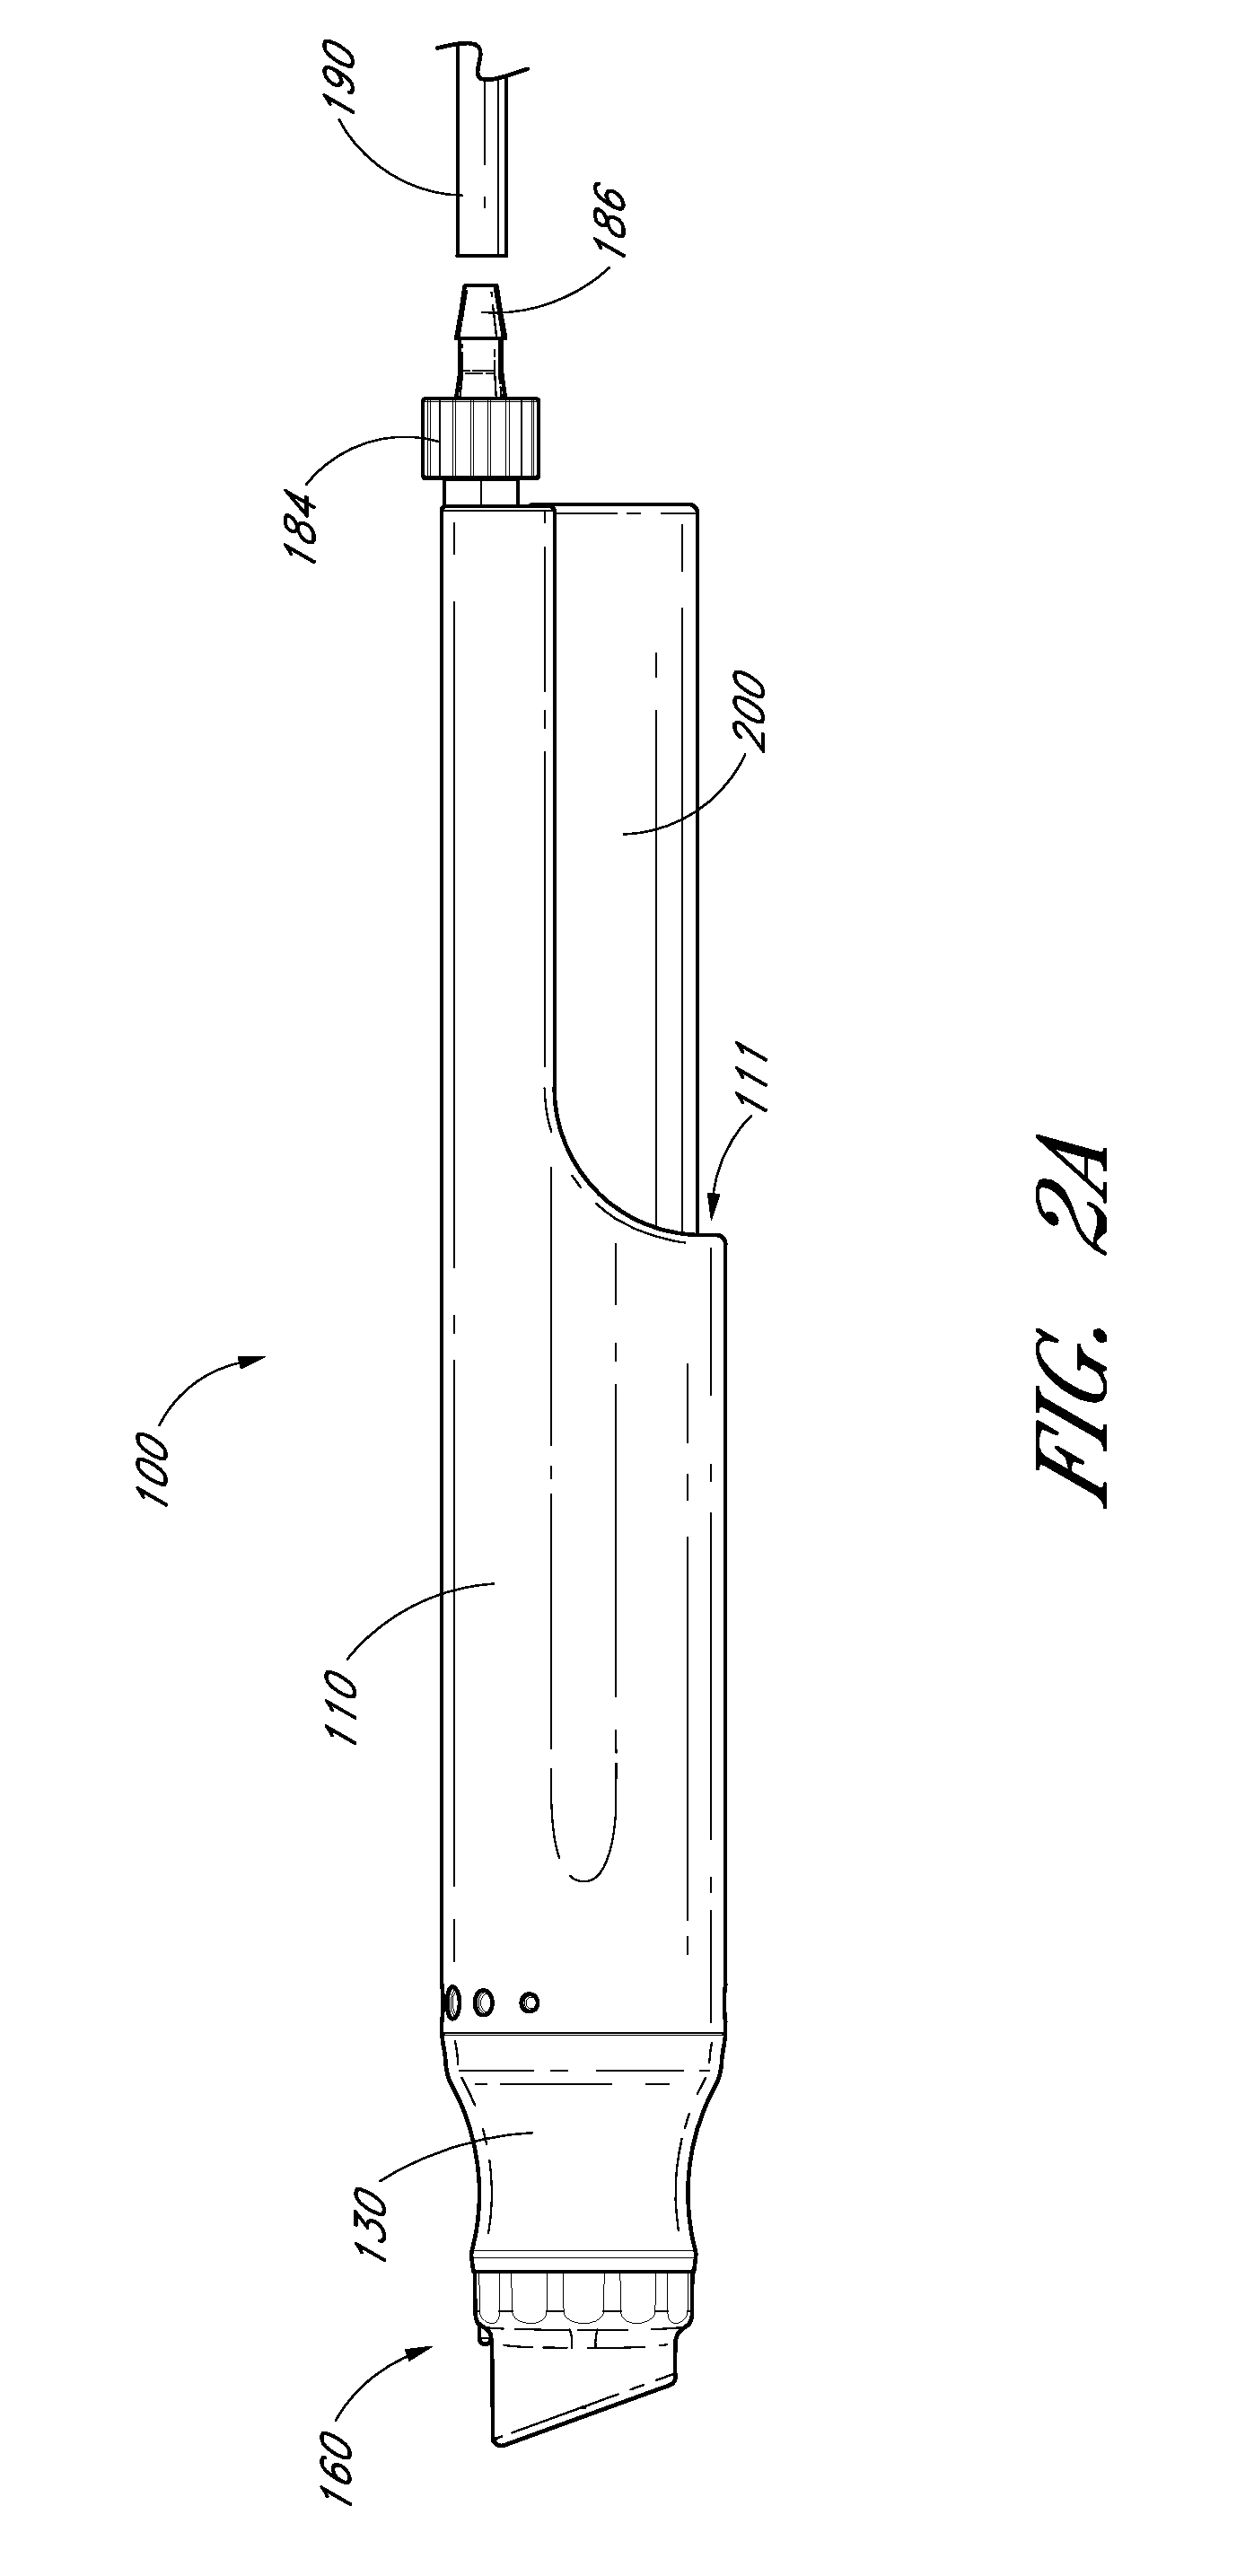 Devices, systems and methods for treating the skin using time-release substances